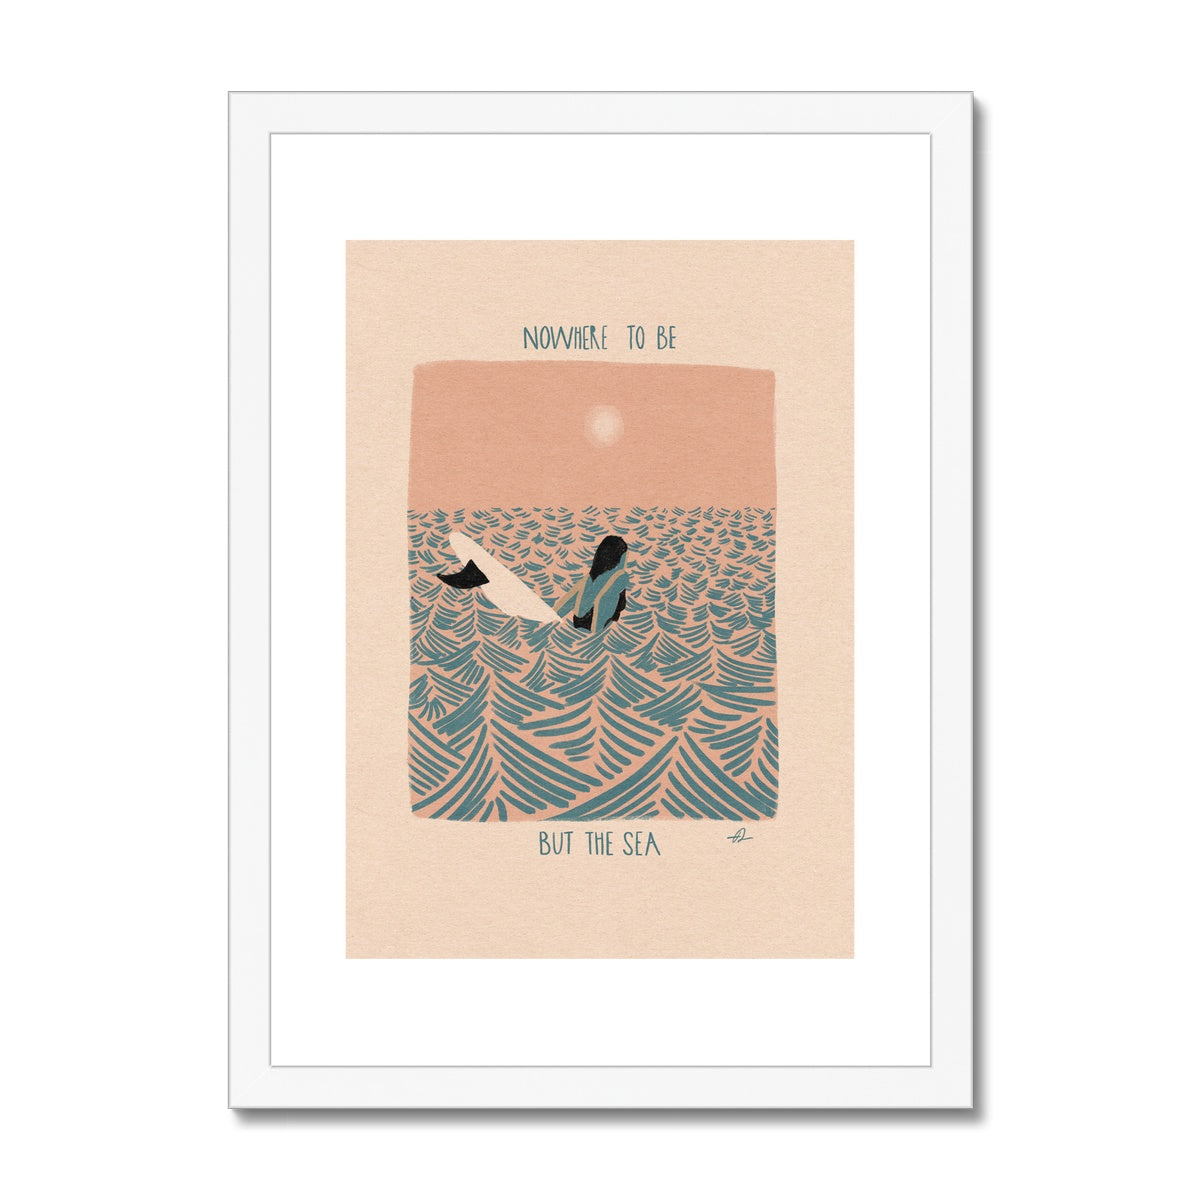 Nowhere to be but the sea Framed & Mounted Print